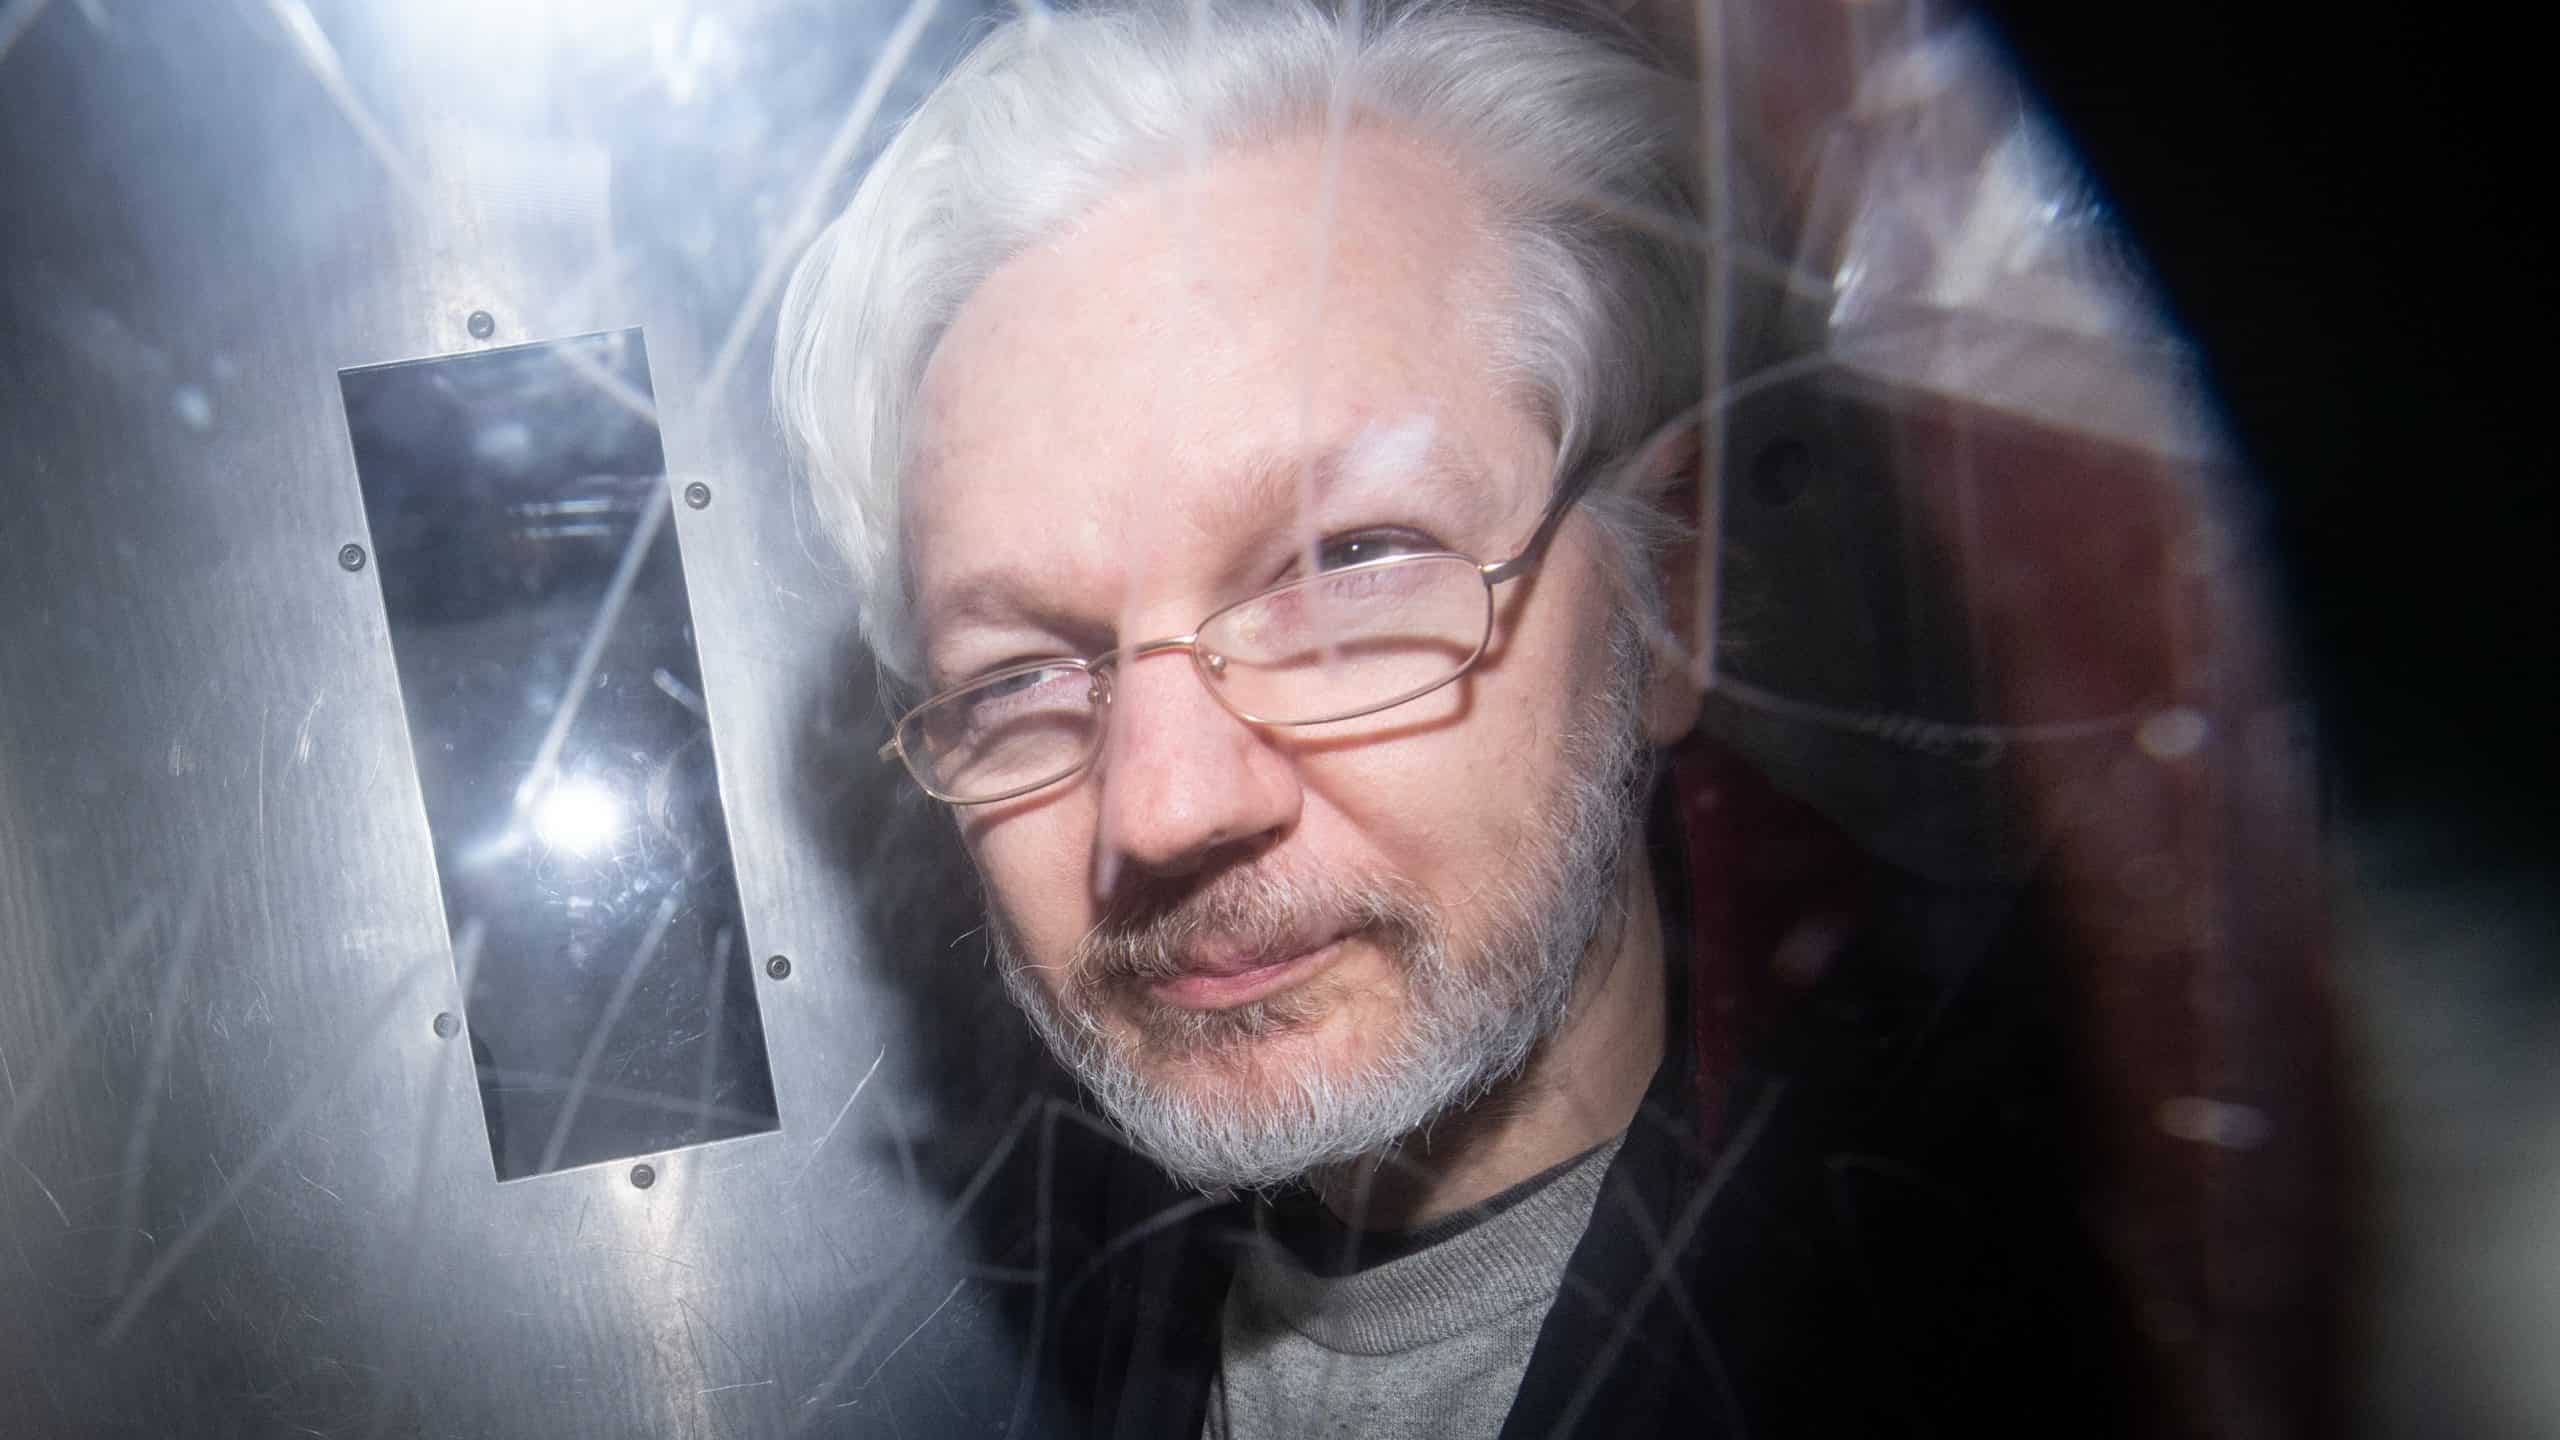 40 rights groups sign open letter to UK Government calling for immediate release of Julian Assange